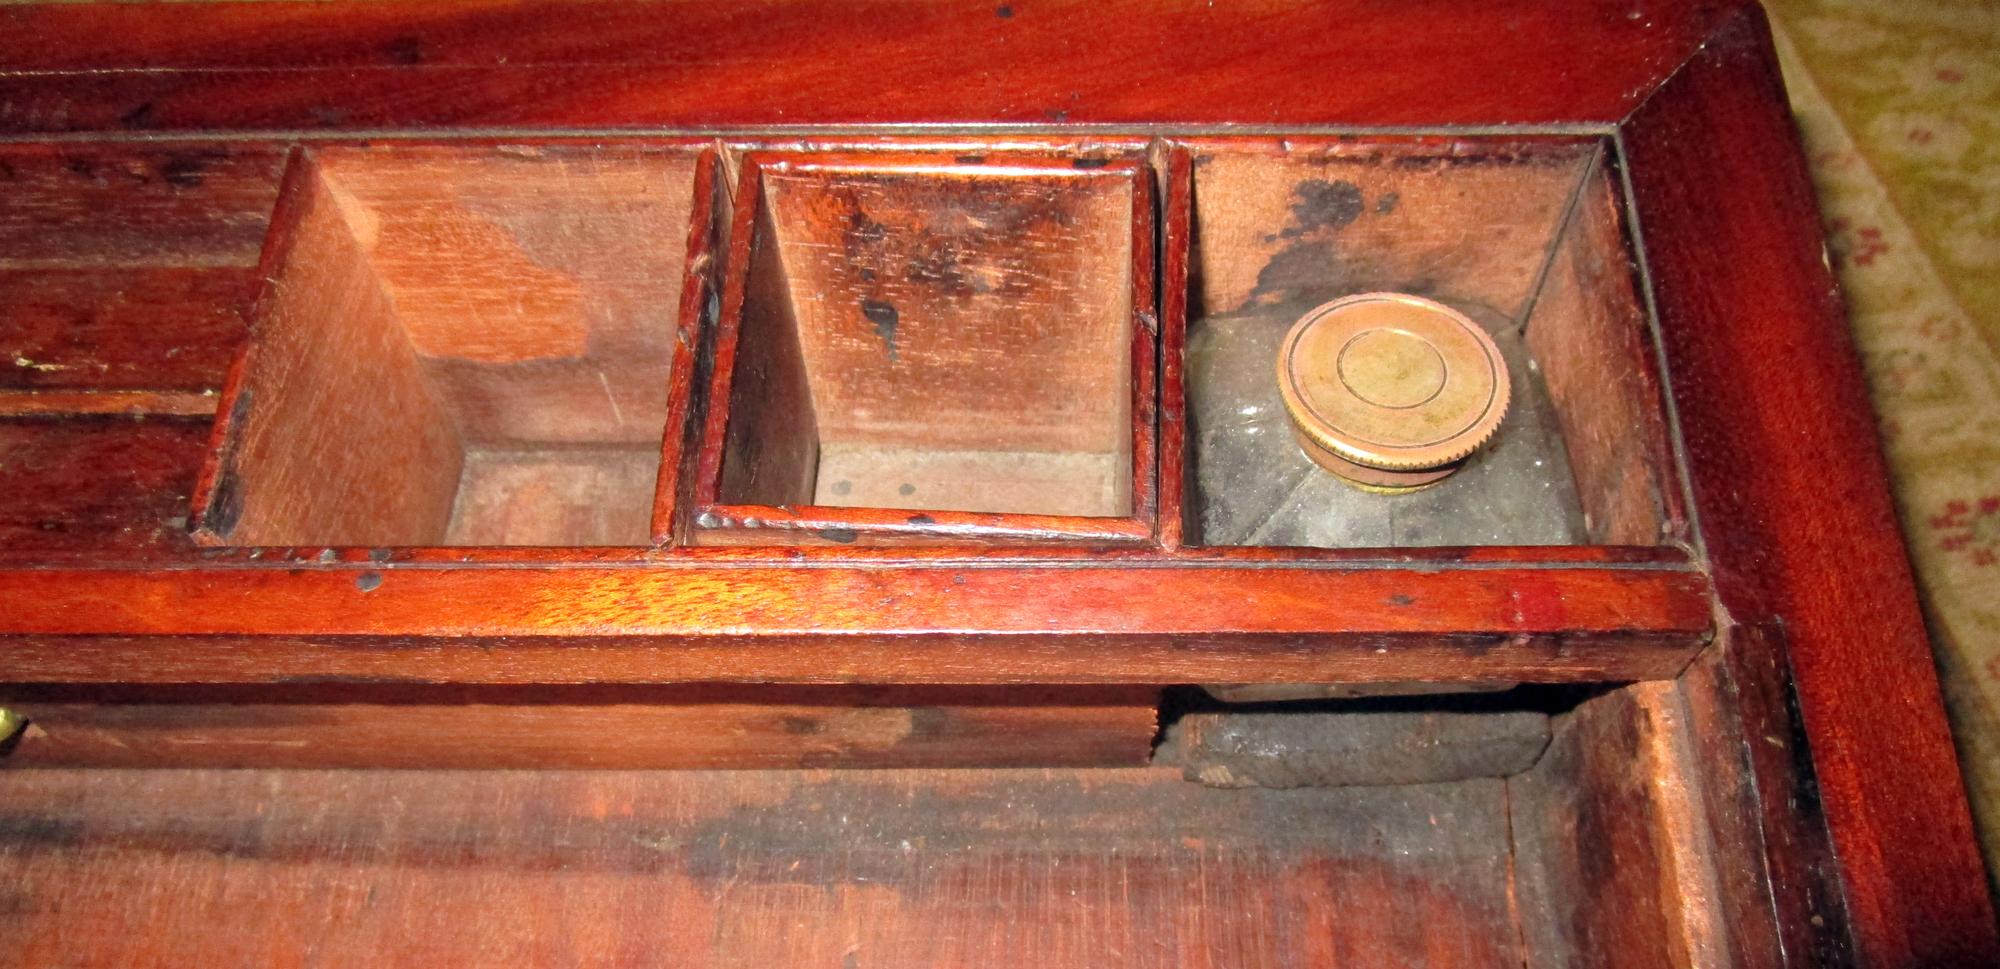 Early 19th Century English Regency Walnut Travelling Lap Desk Box with Secret Compartment